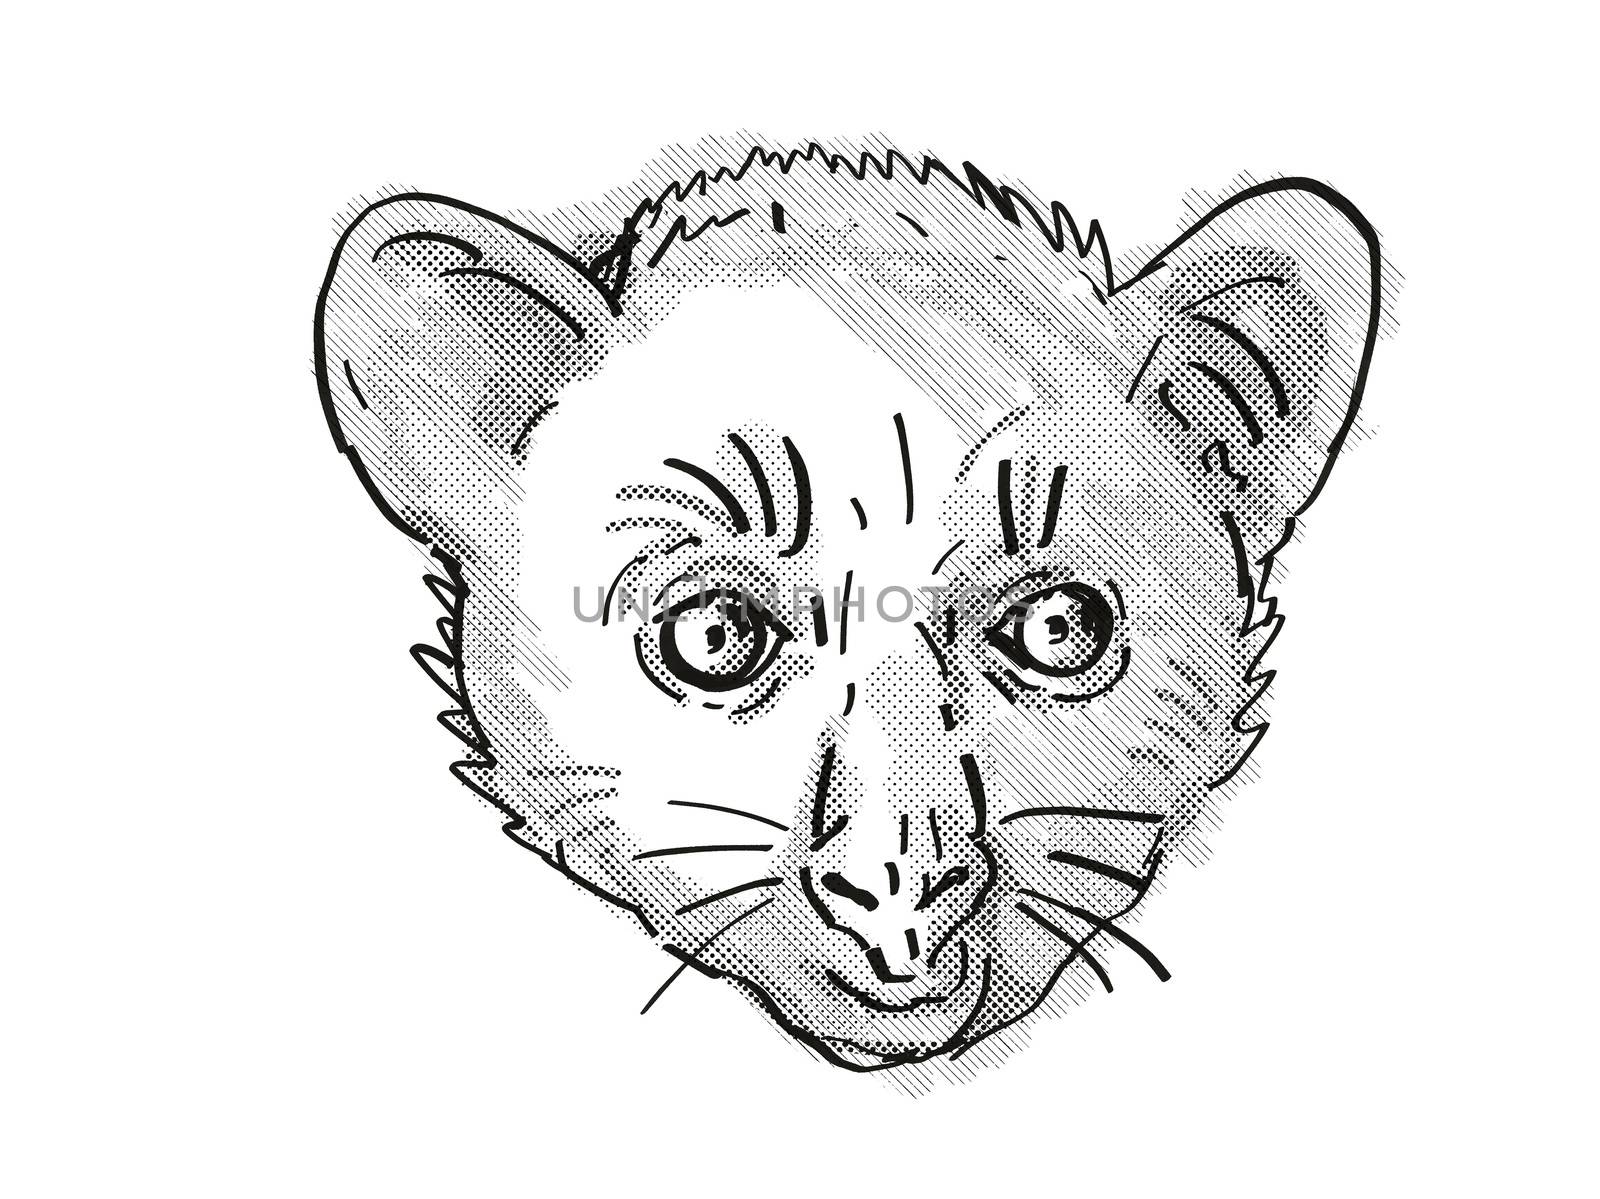 Retro cartoon style drawing of head of an Aye-Aye or Daubentonia madagascariensis , an endangered wildlife species on isolated white background done in black and white.